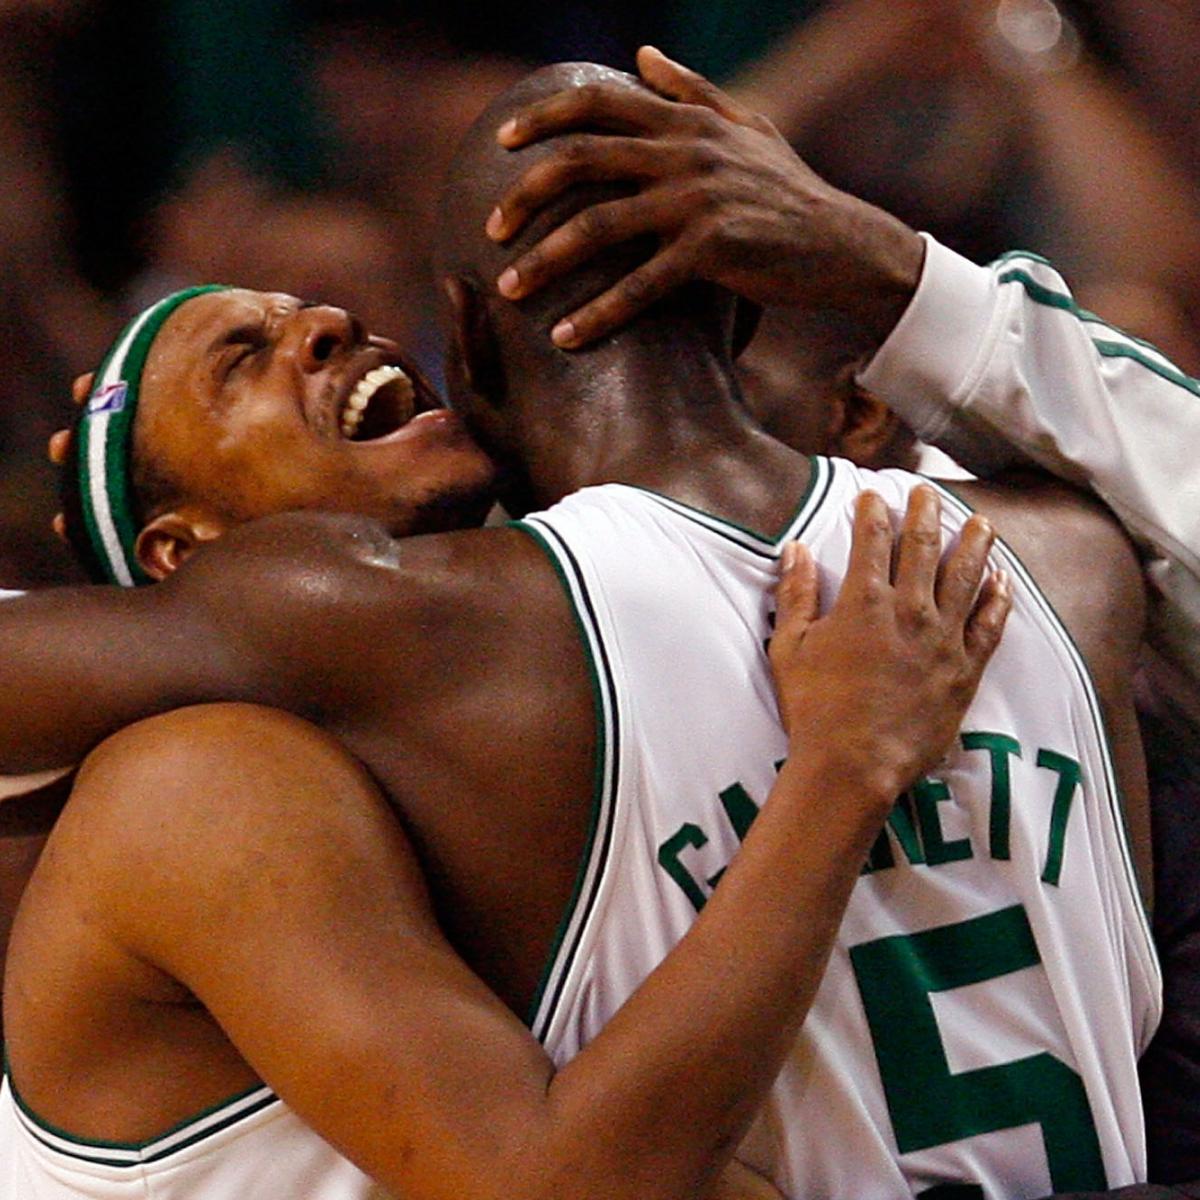 A look at what's in store for members of the 2009-10 Celtics